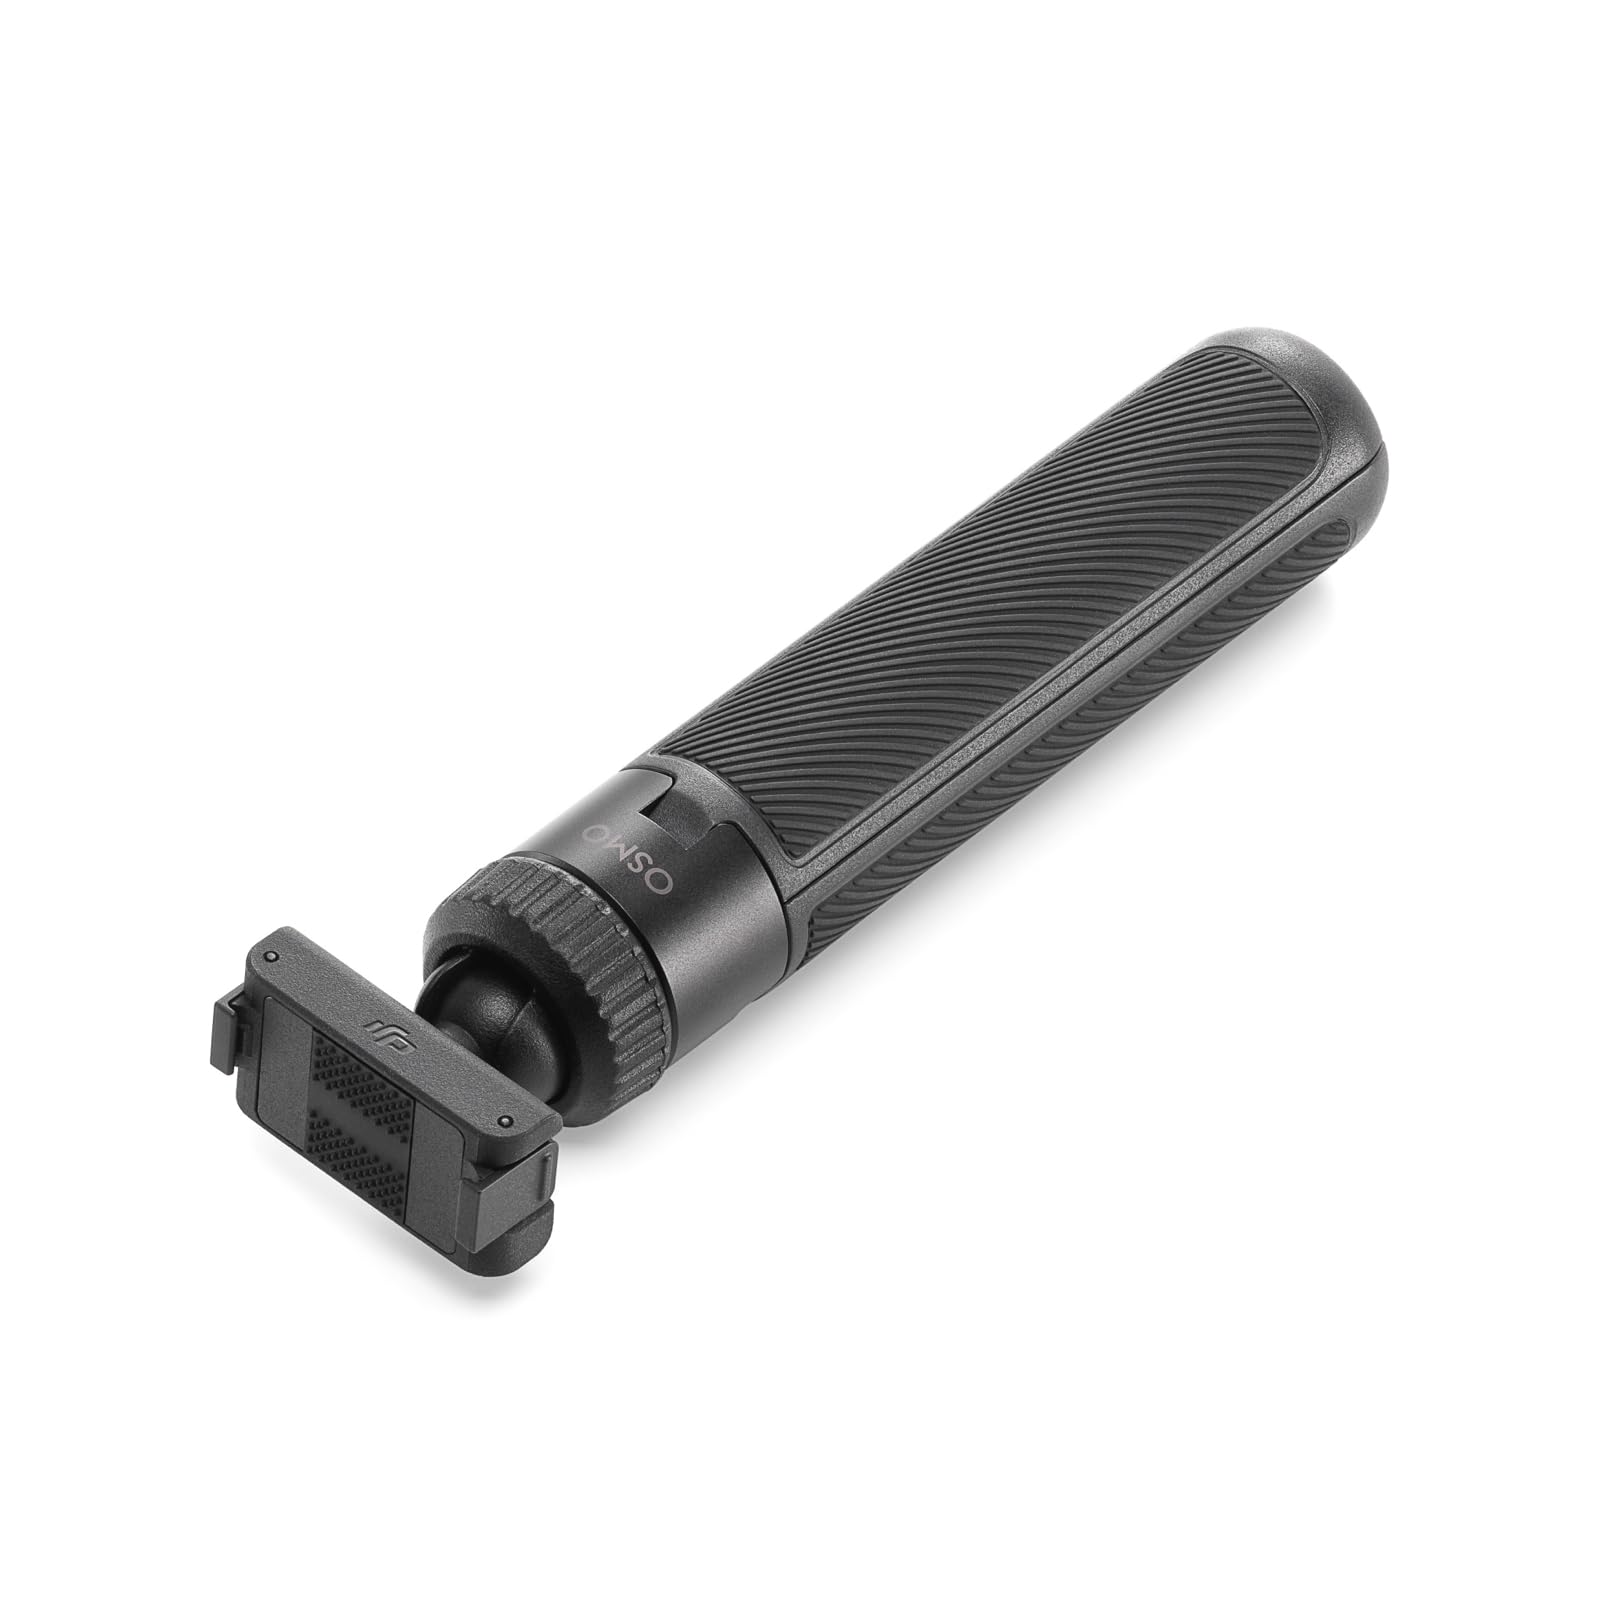 DJI Osmo Action Mini Extension Rod, Compatible with Osmo Action 3, Osmo Action 4